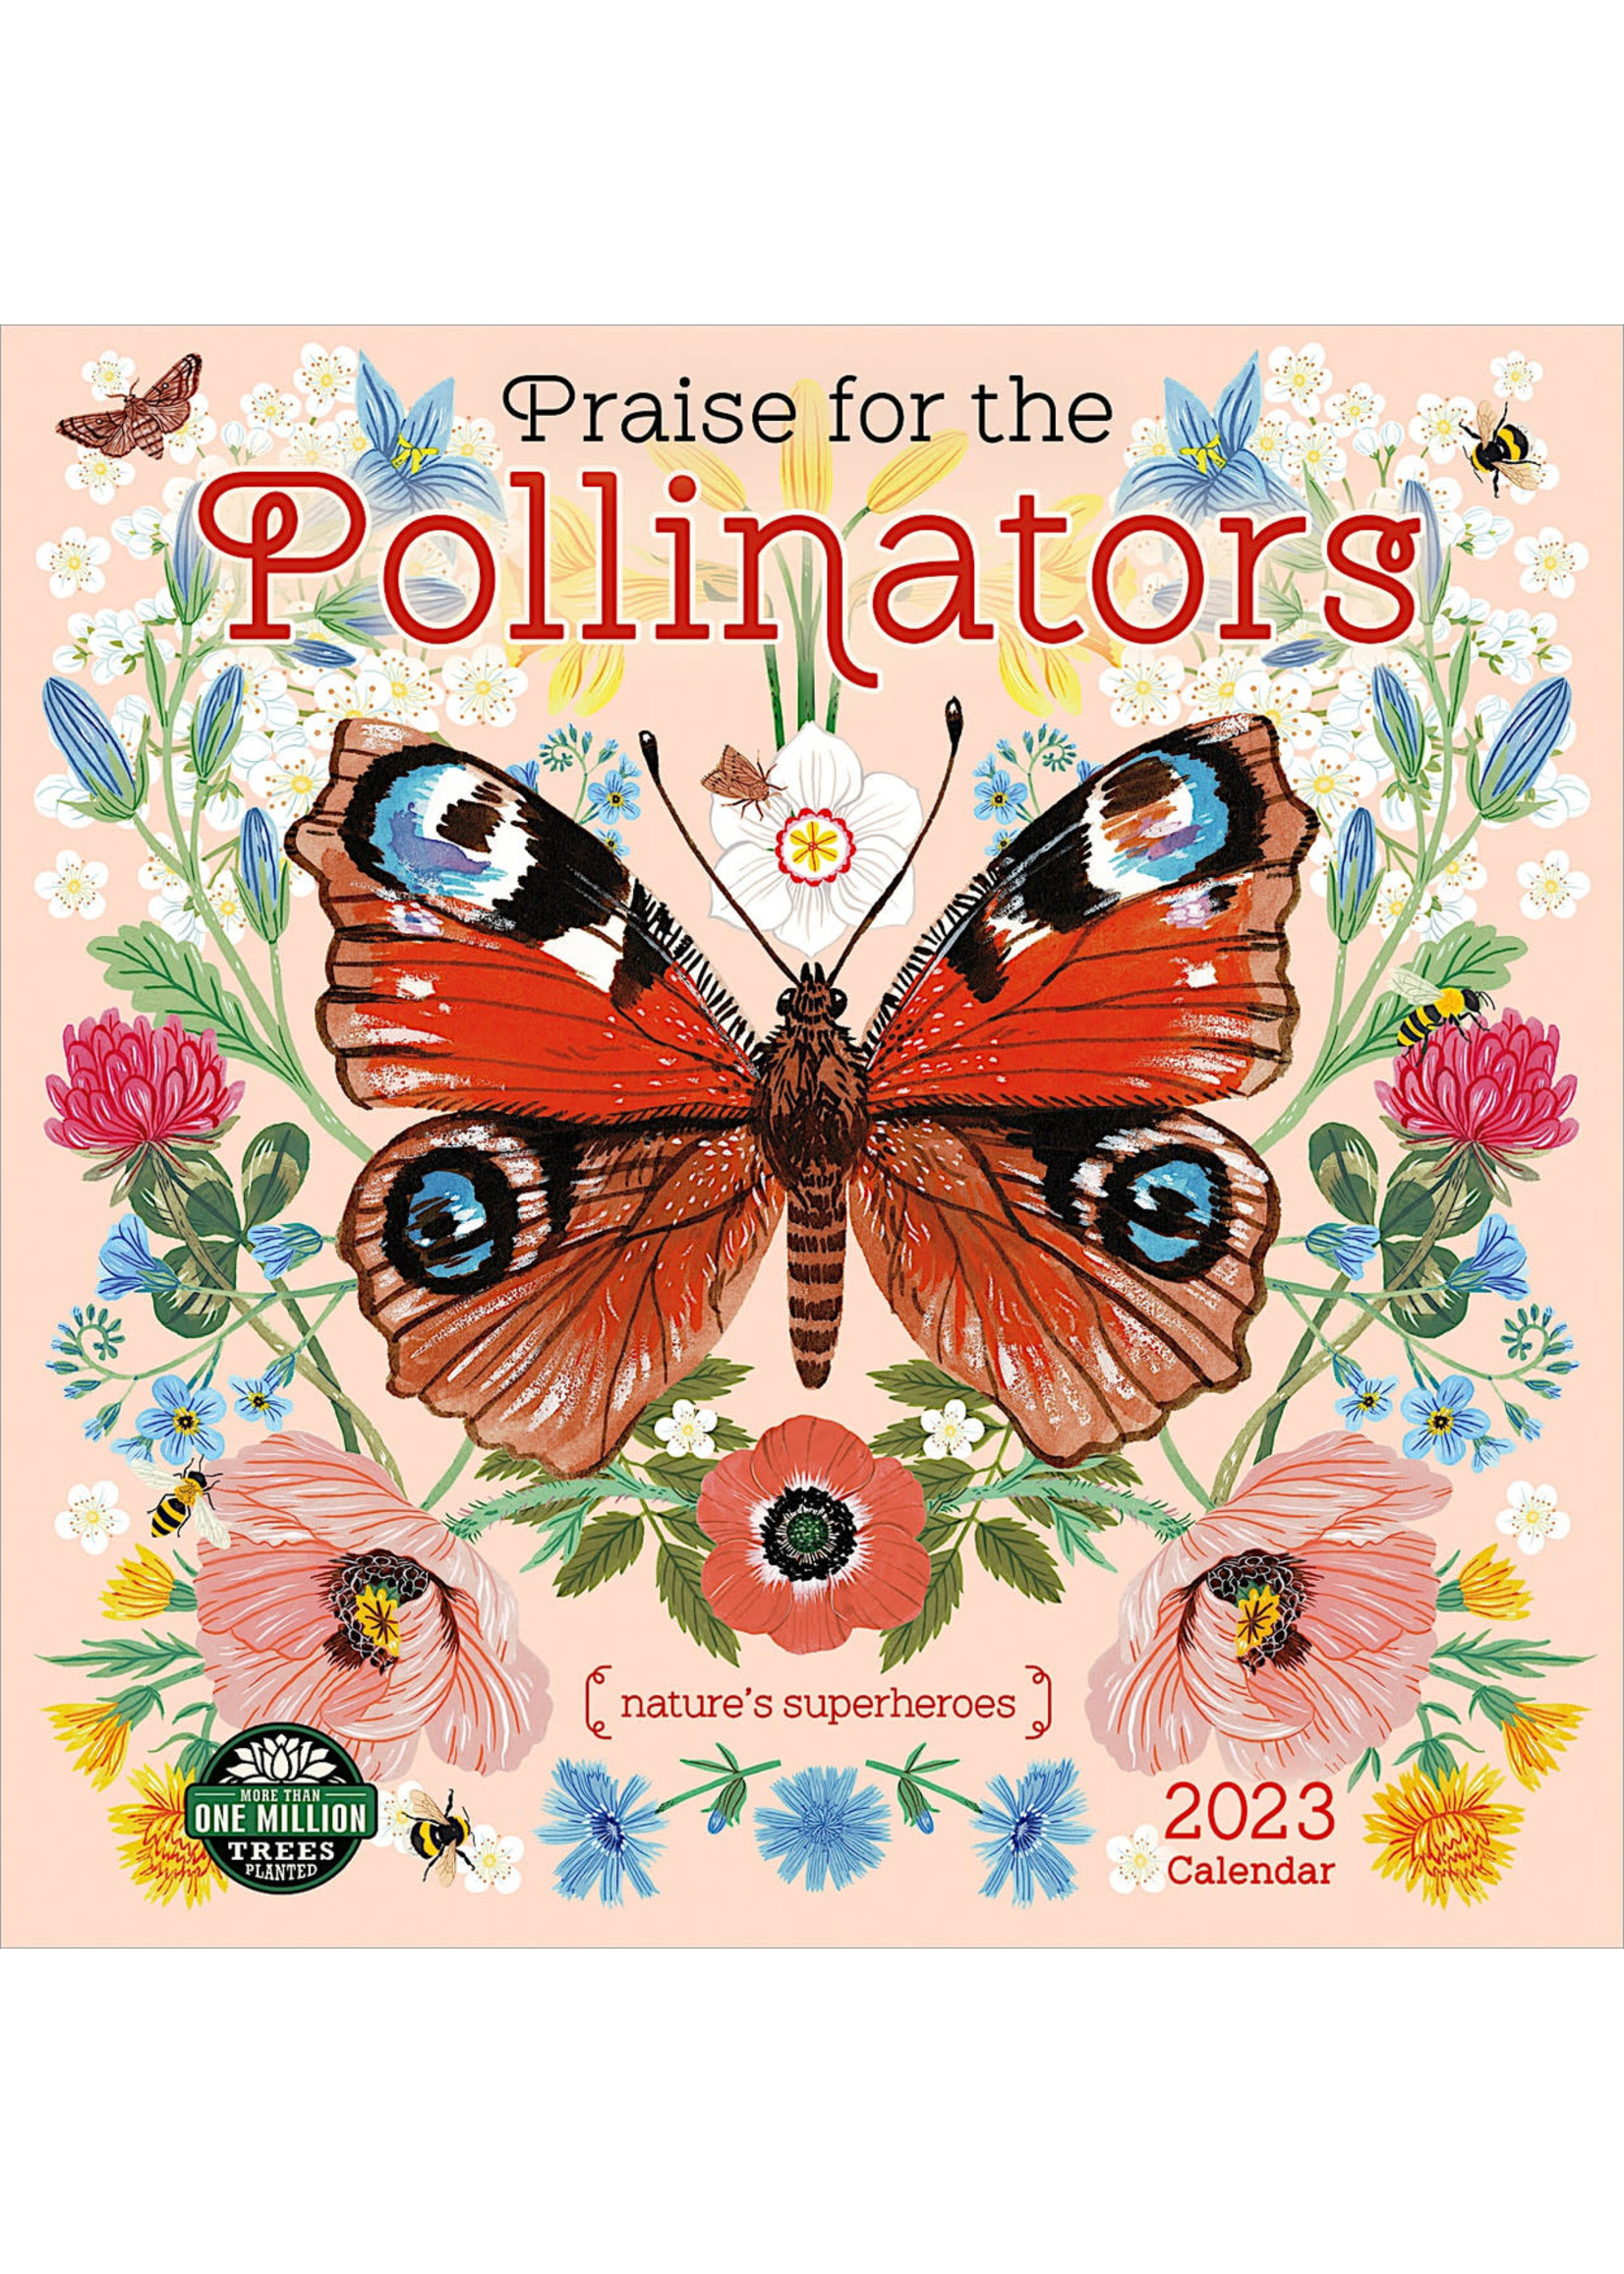 Cal 23 Praise For the Pollinators